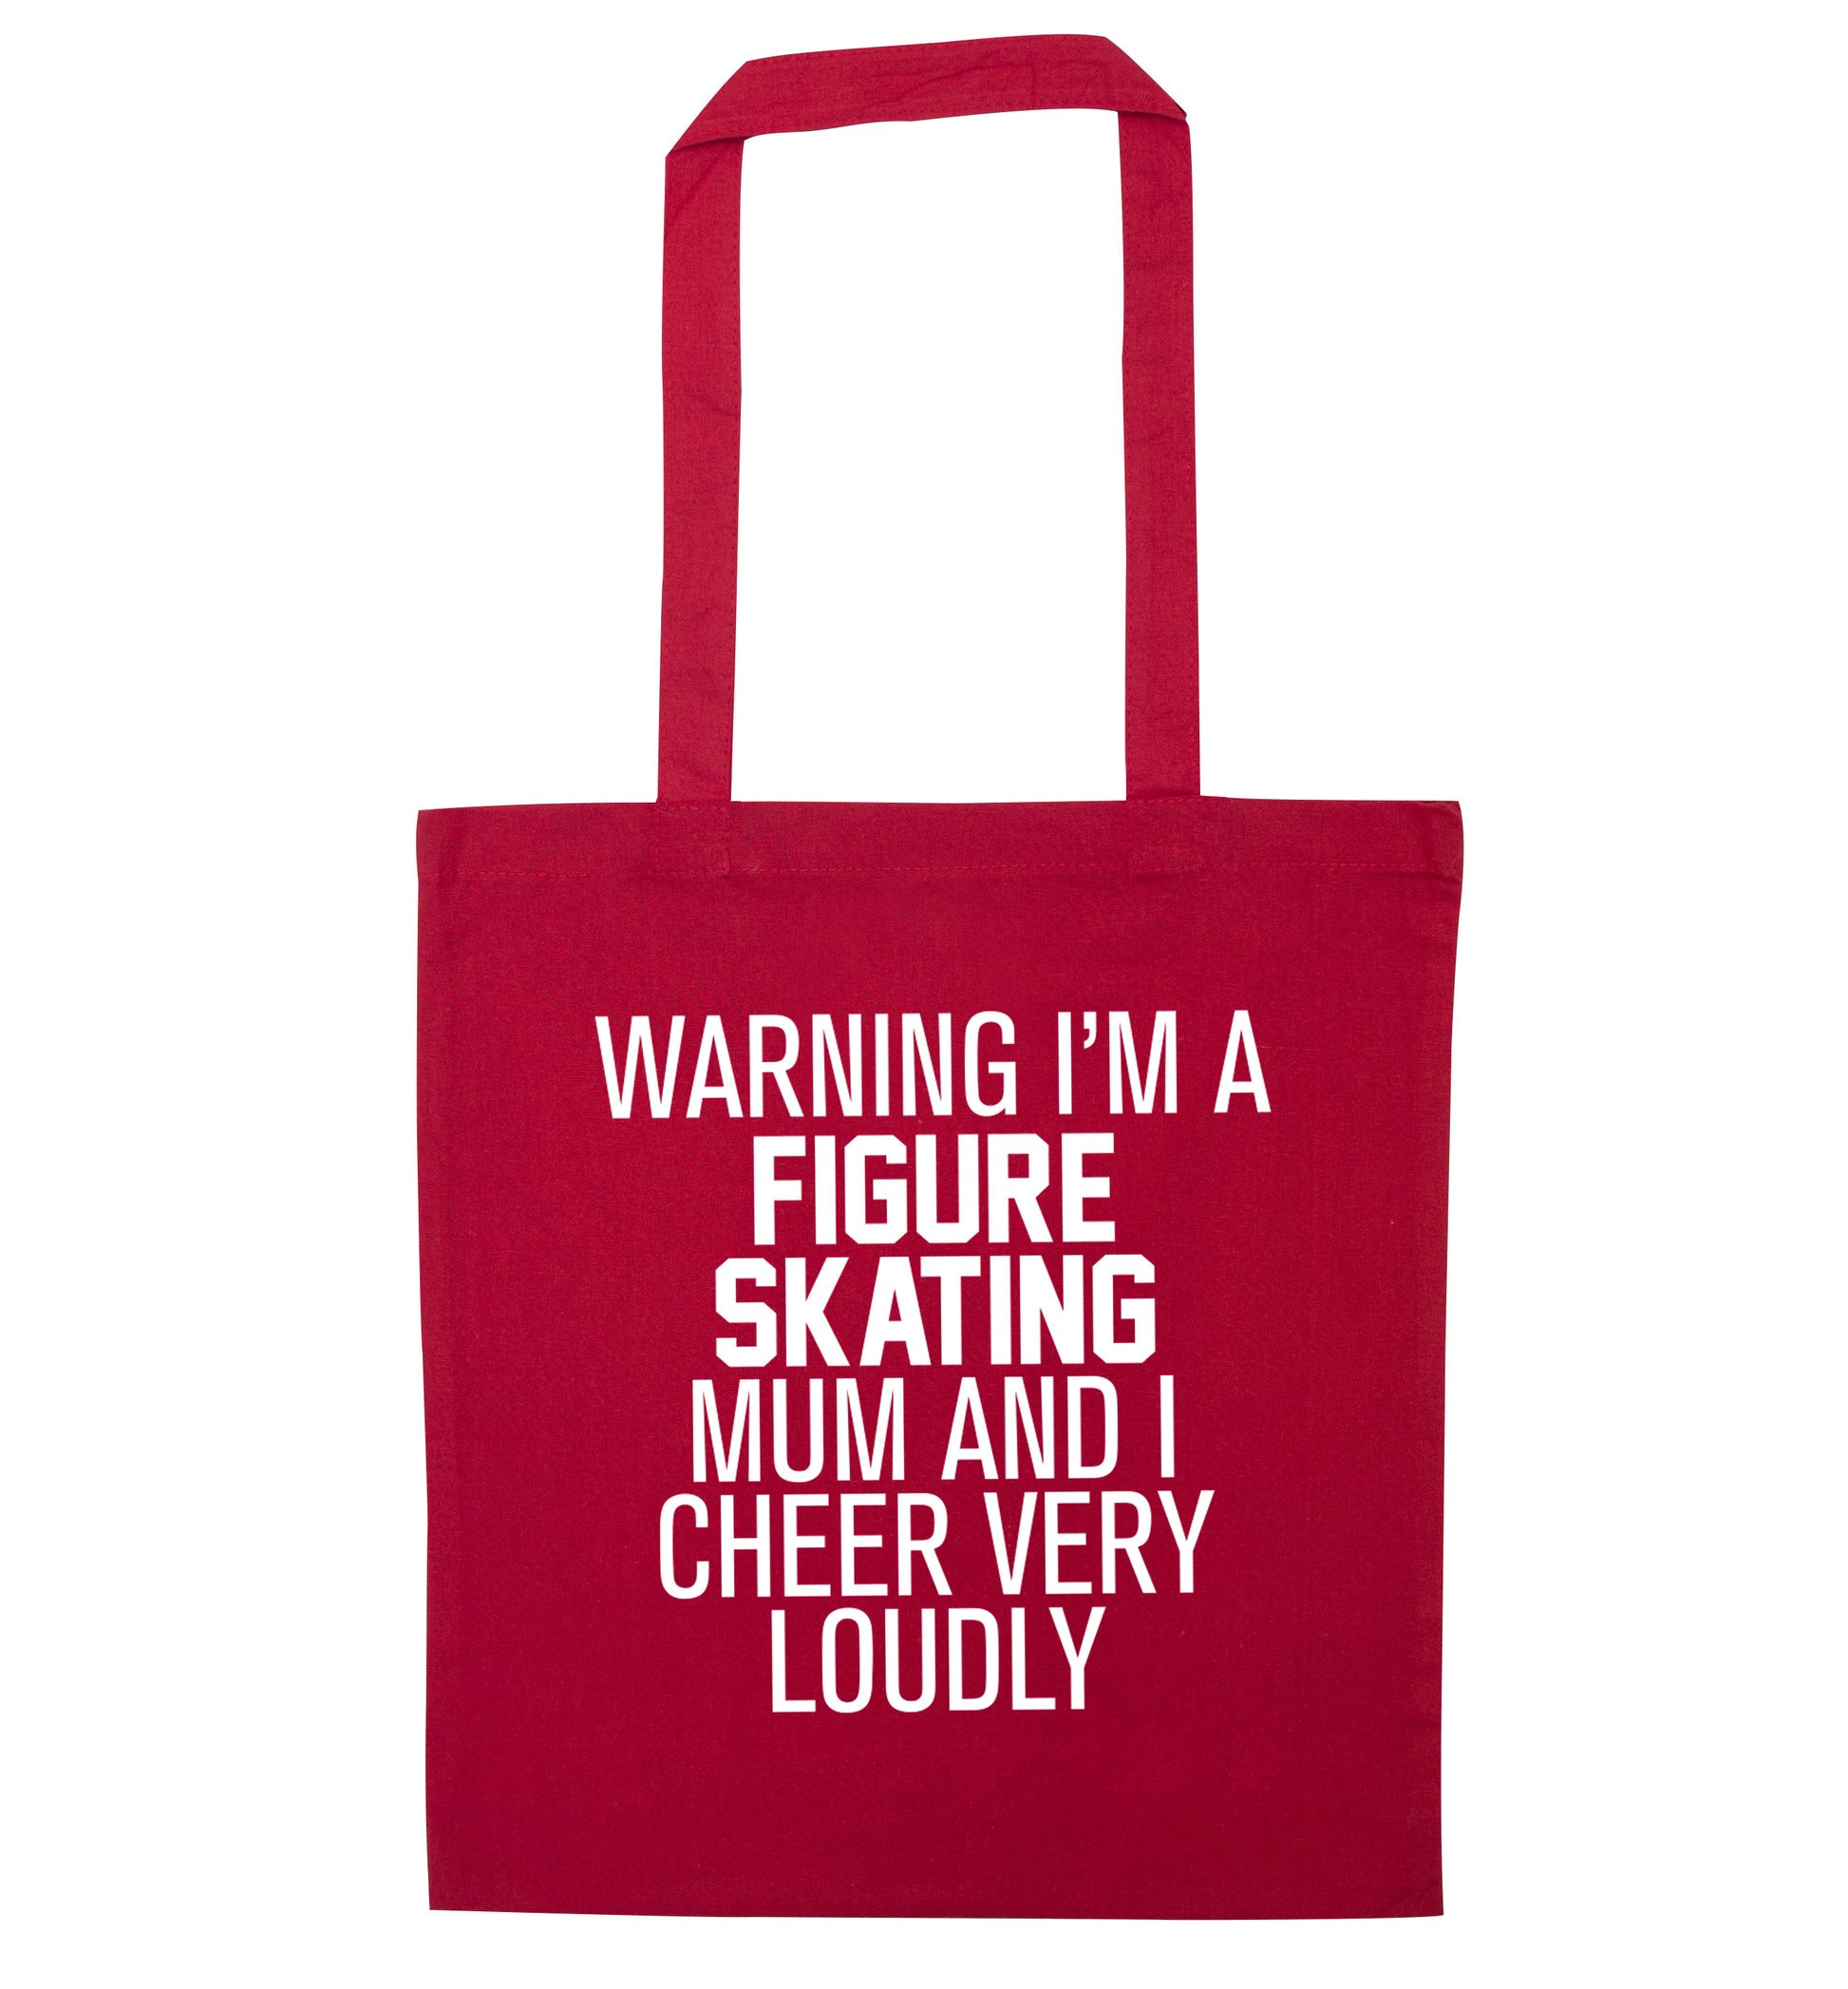 Warning I'm a figure skating mum and I cheer very loudly red tote bag